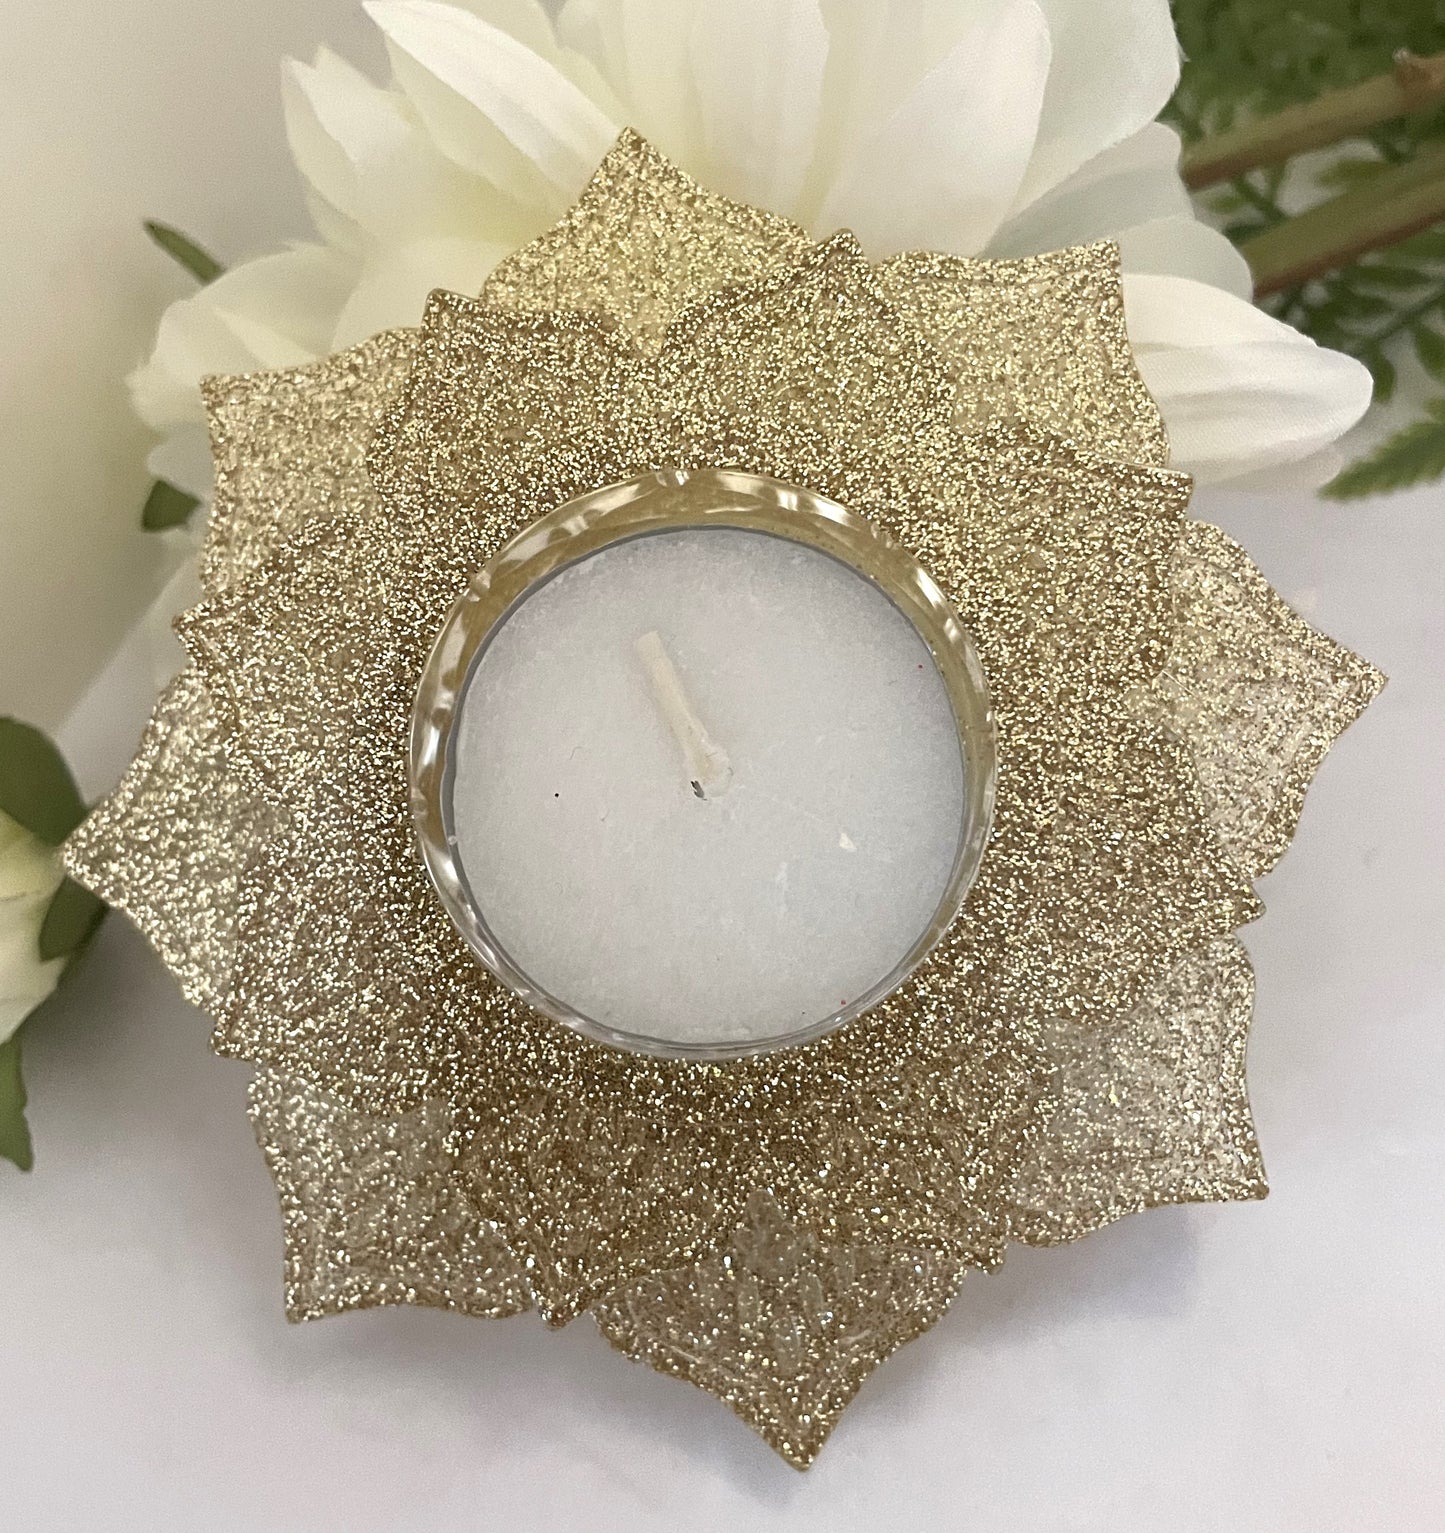 Candle- Lotus Shaped Tealight Gold Glitter